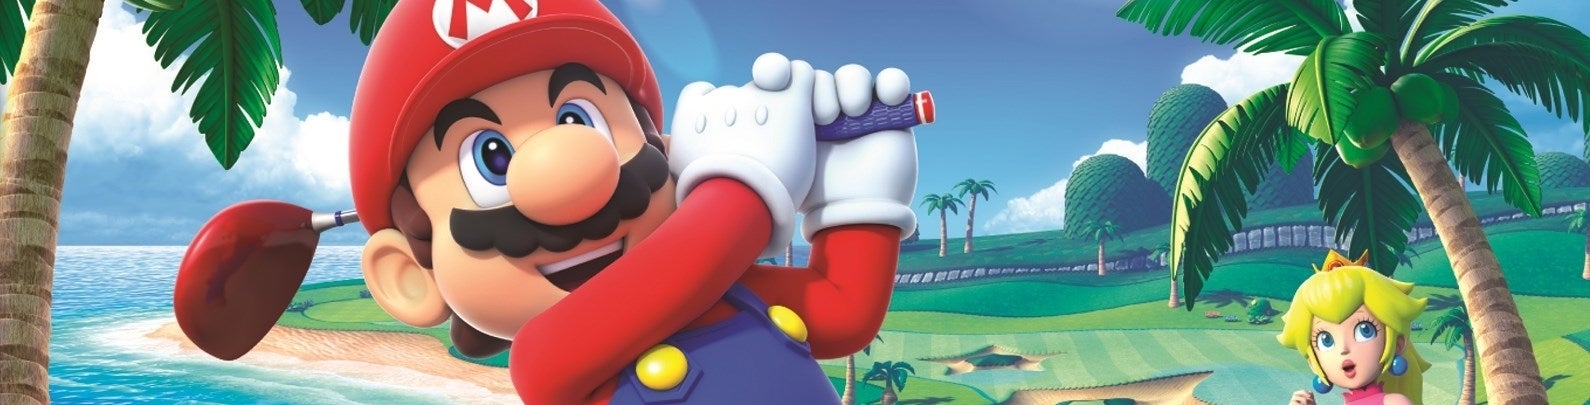 Image for Mario Golf: World Tour review